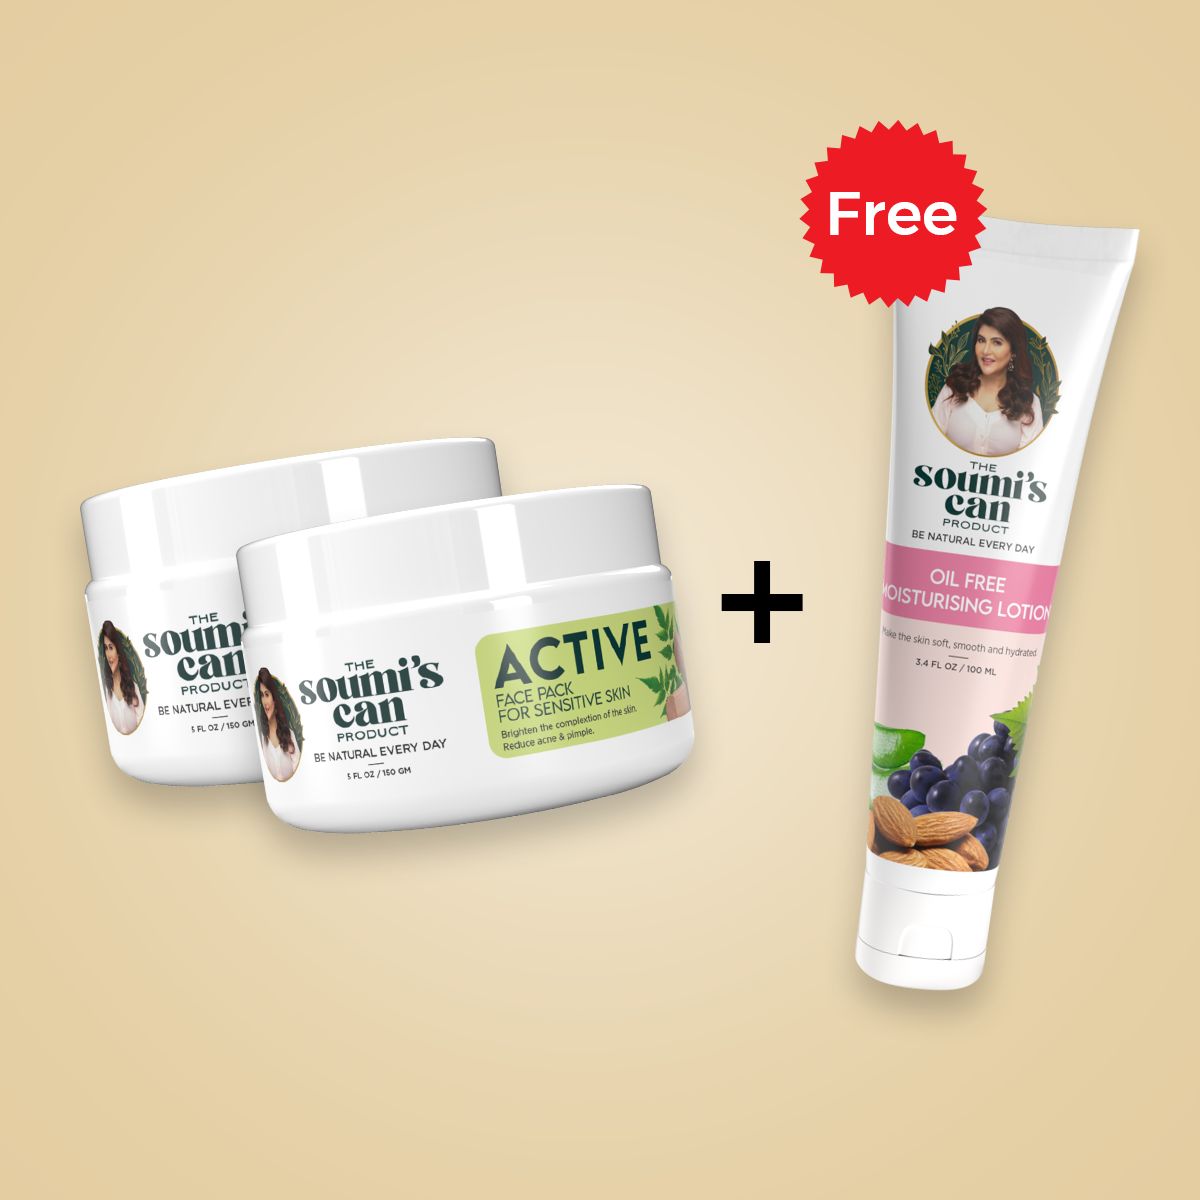 Buy 2 Can Active & Get 1 Oil Free Moisturising Lotion